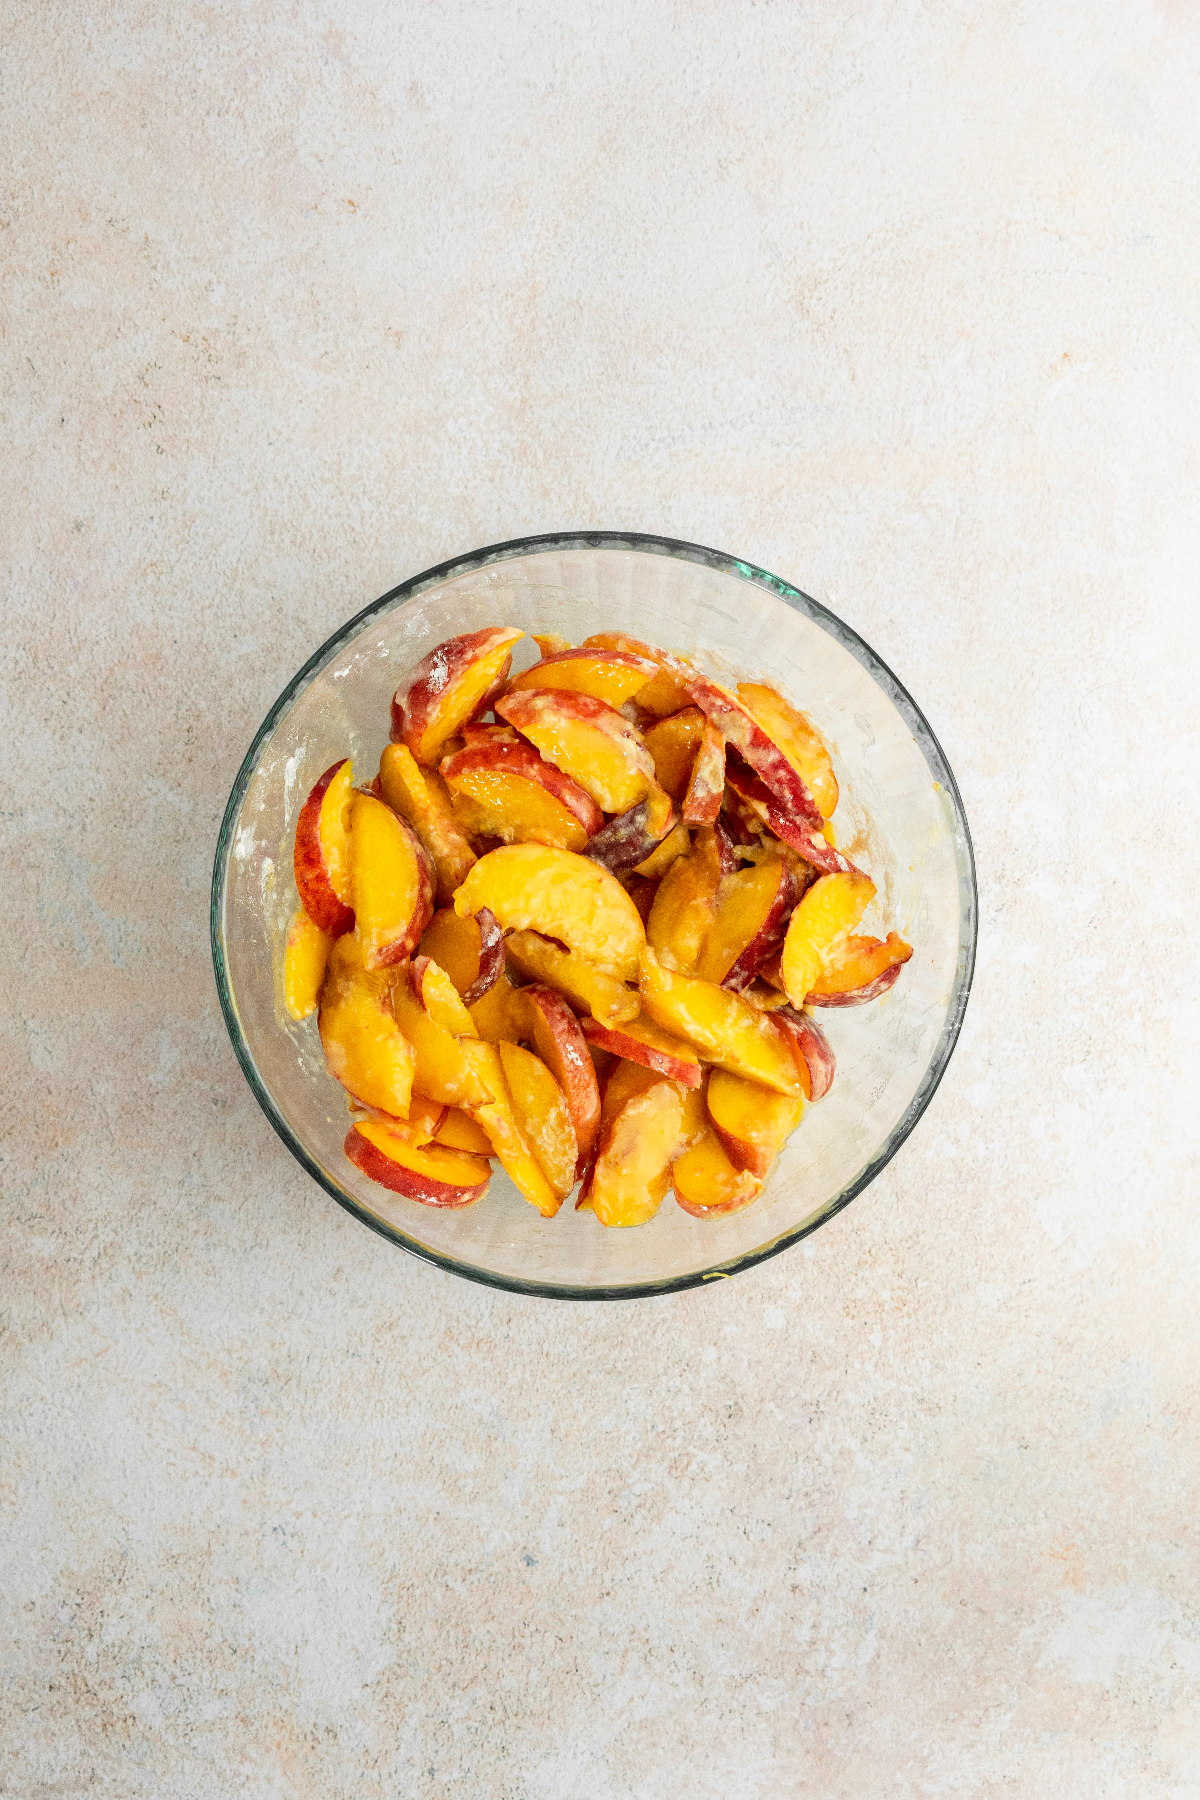 Sliced peaches in a large glass bowl.